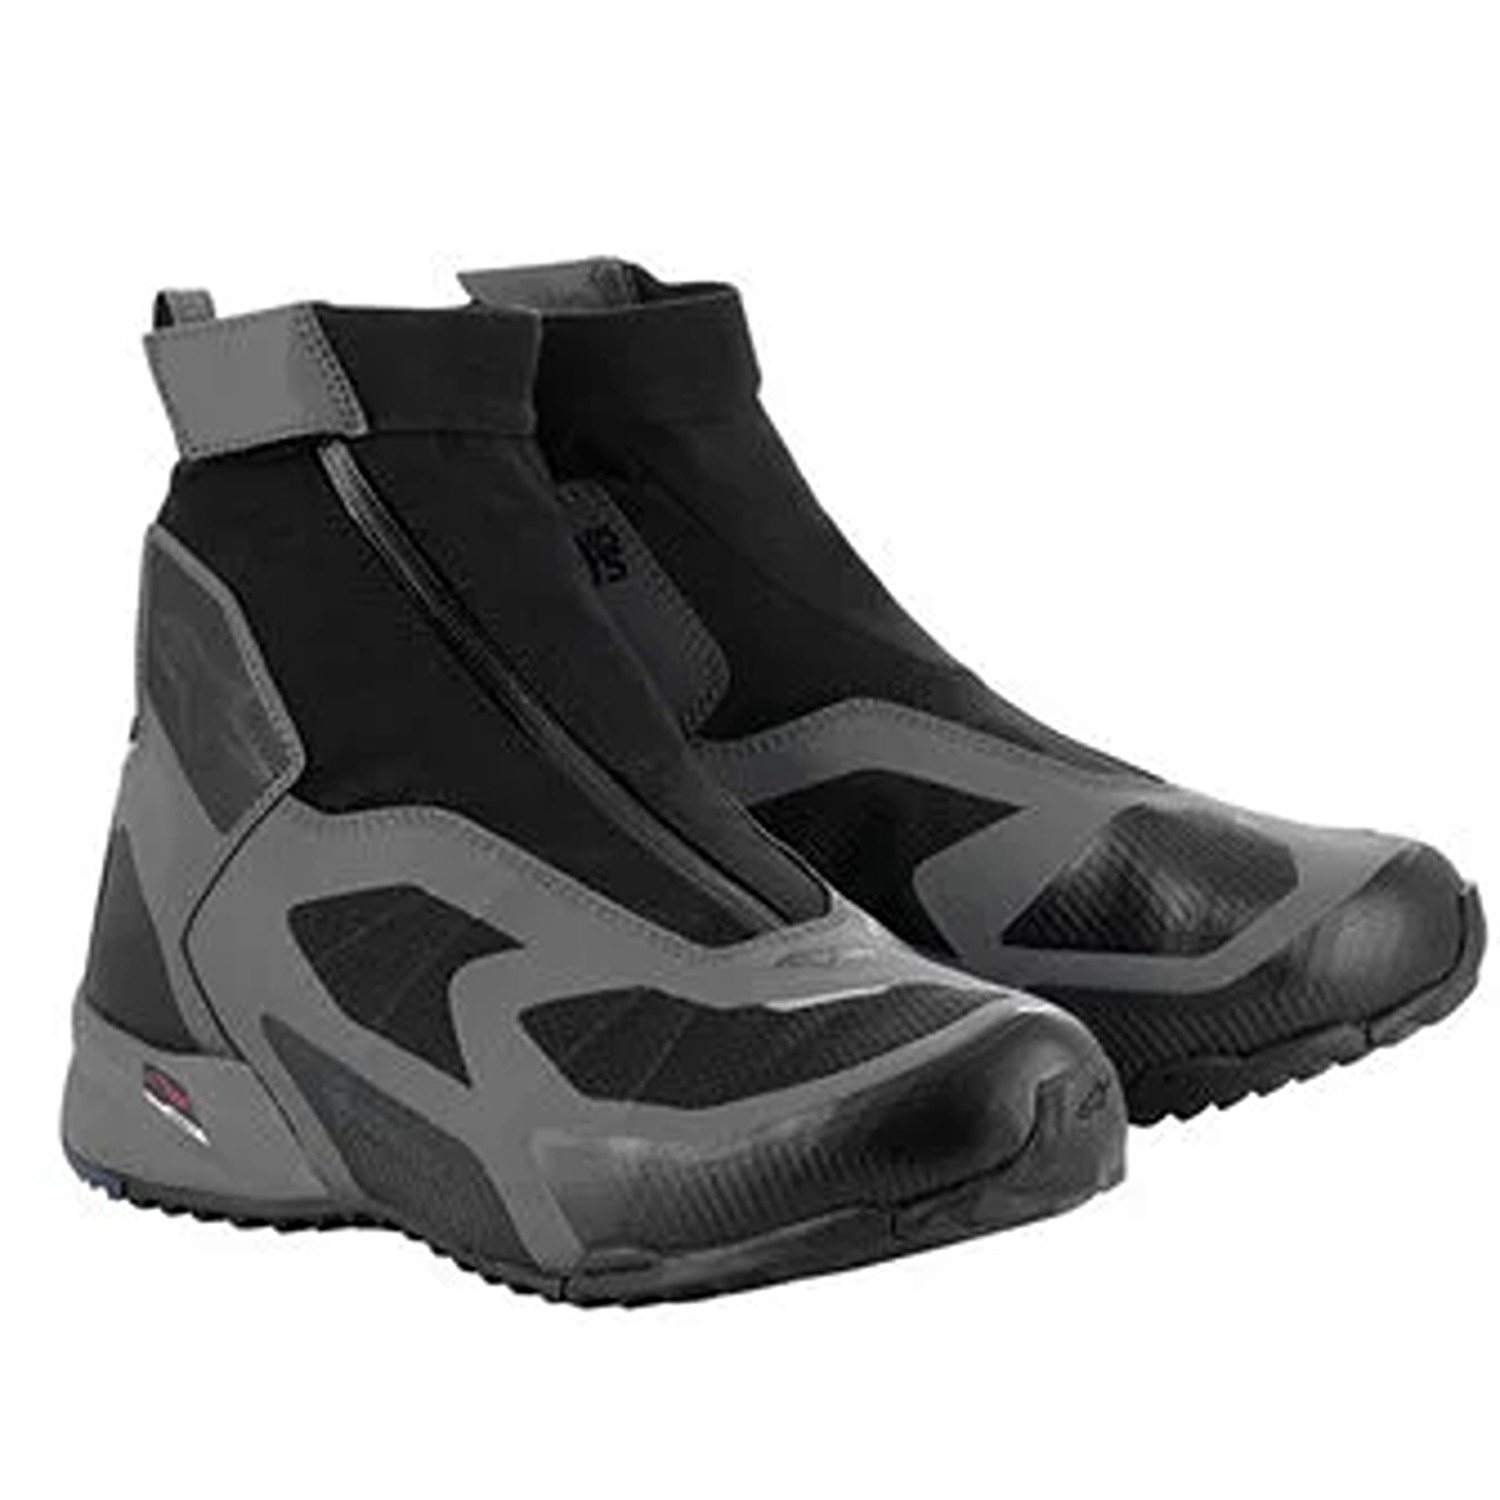 Image of Alpinestars CR-8 Gore-Tex Shoes Black Mid Gray Bright Red Size US 6 ID 8059347260129